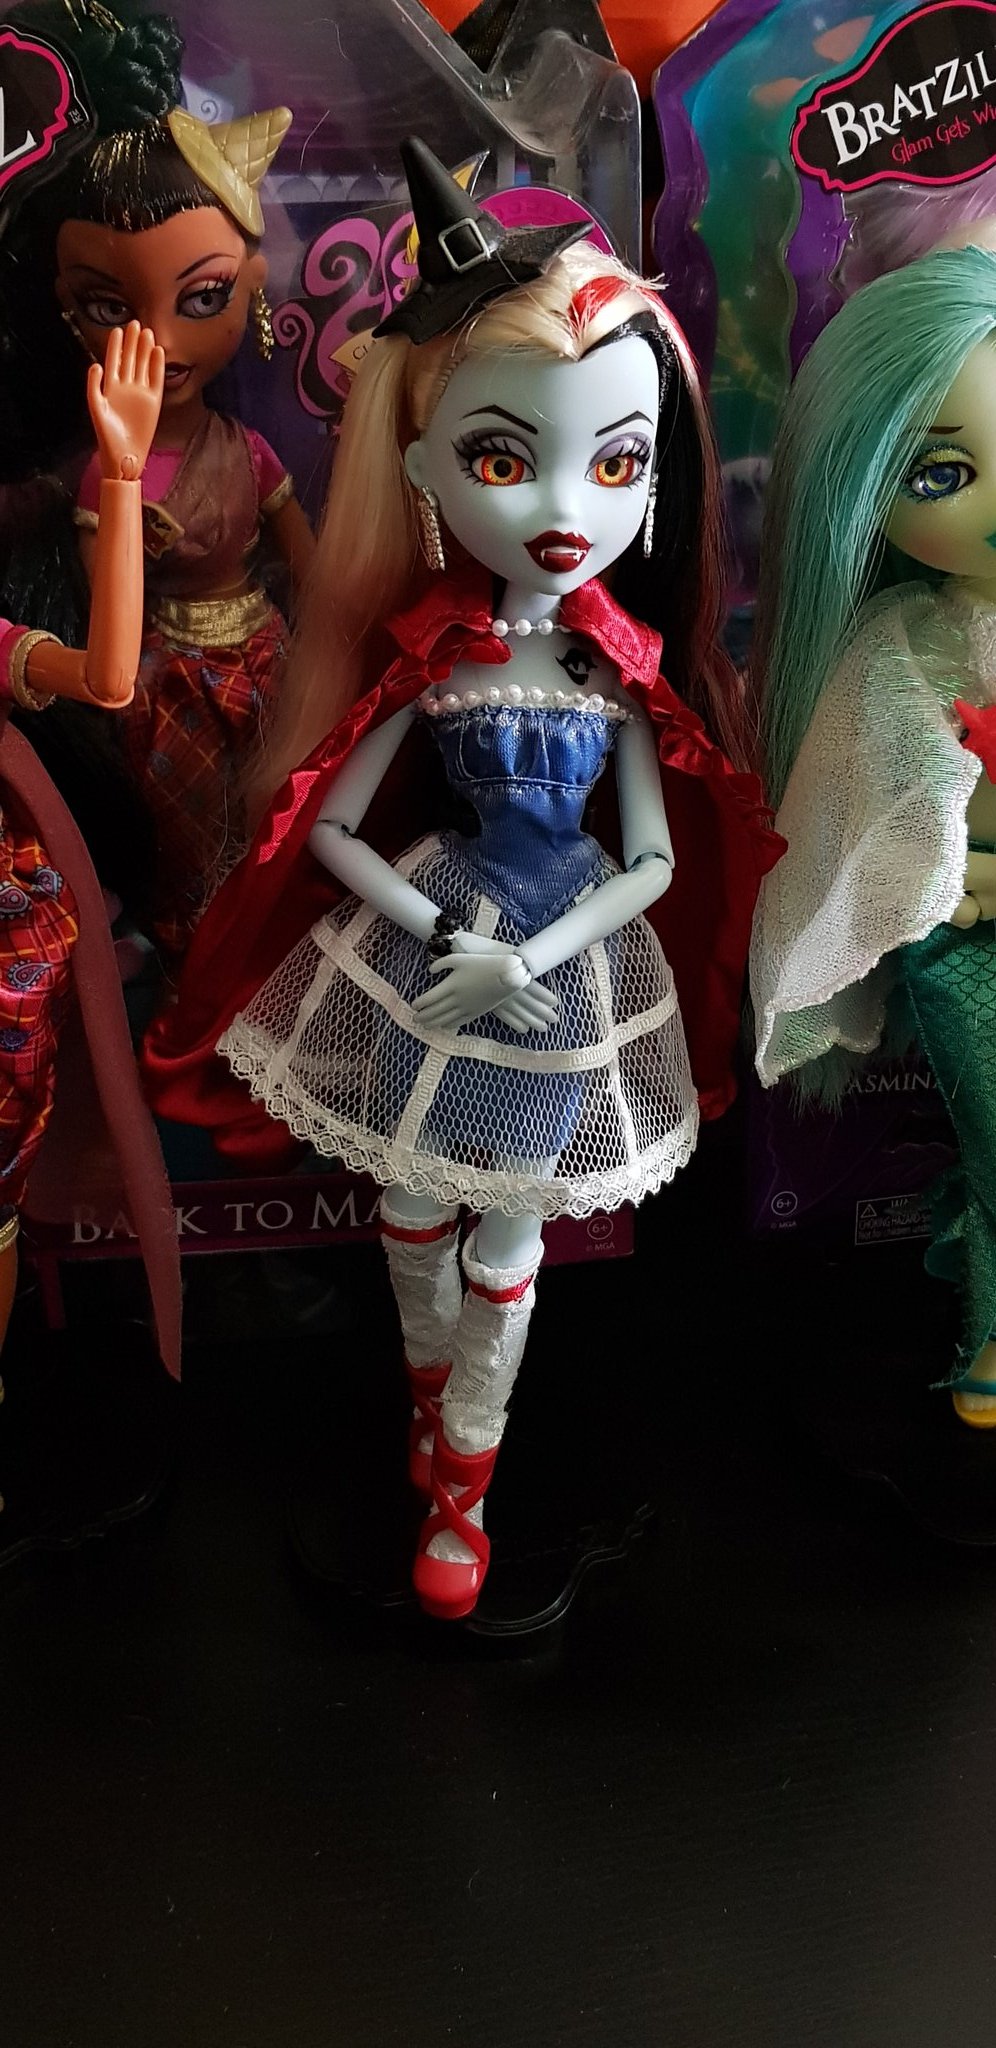 ❄Sarvina Valentine❄ on X: One of my most prized and rarer dolls